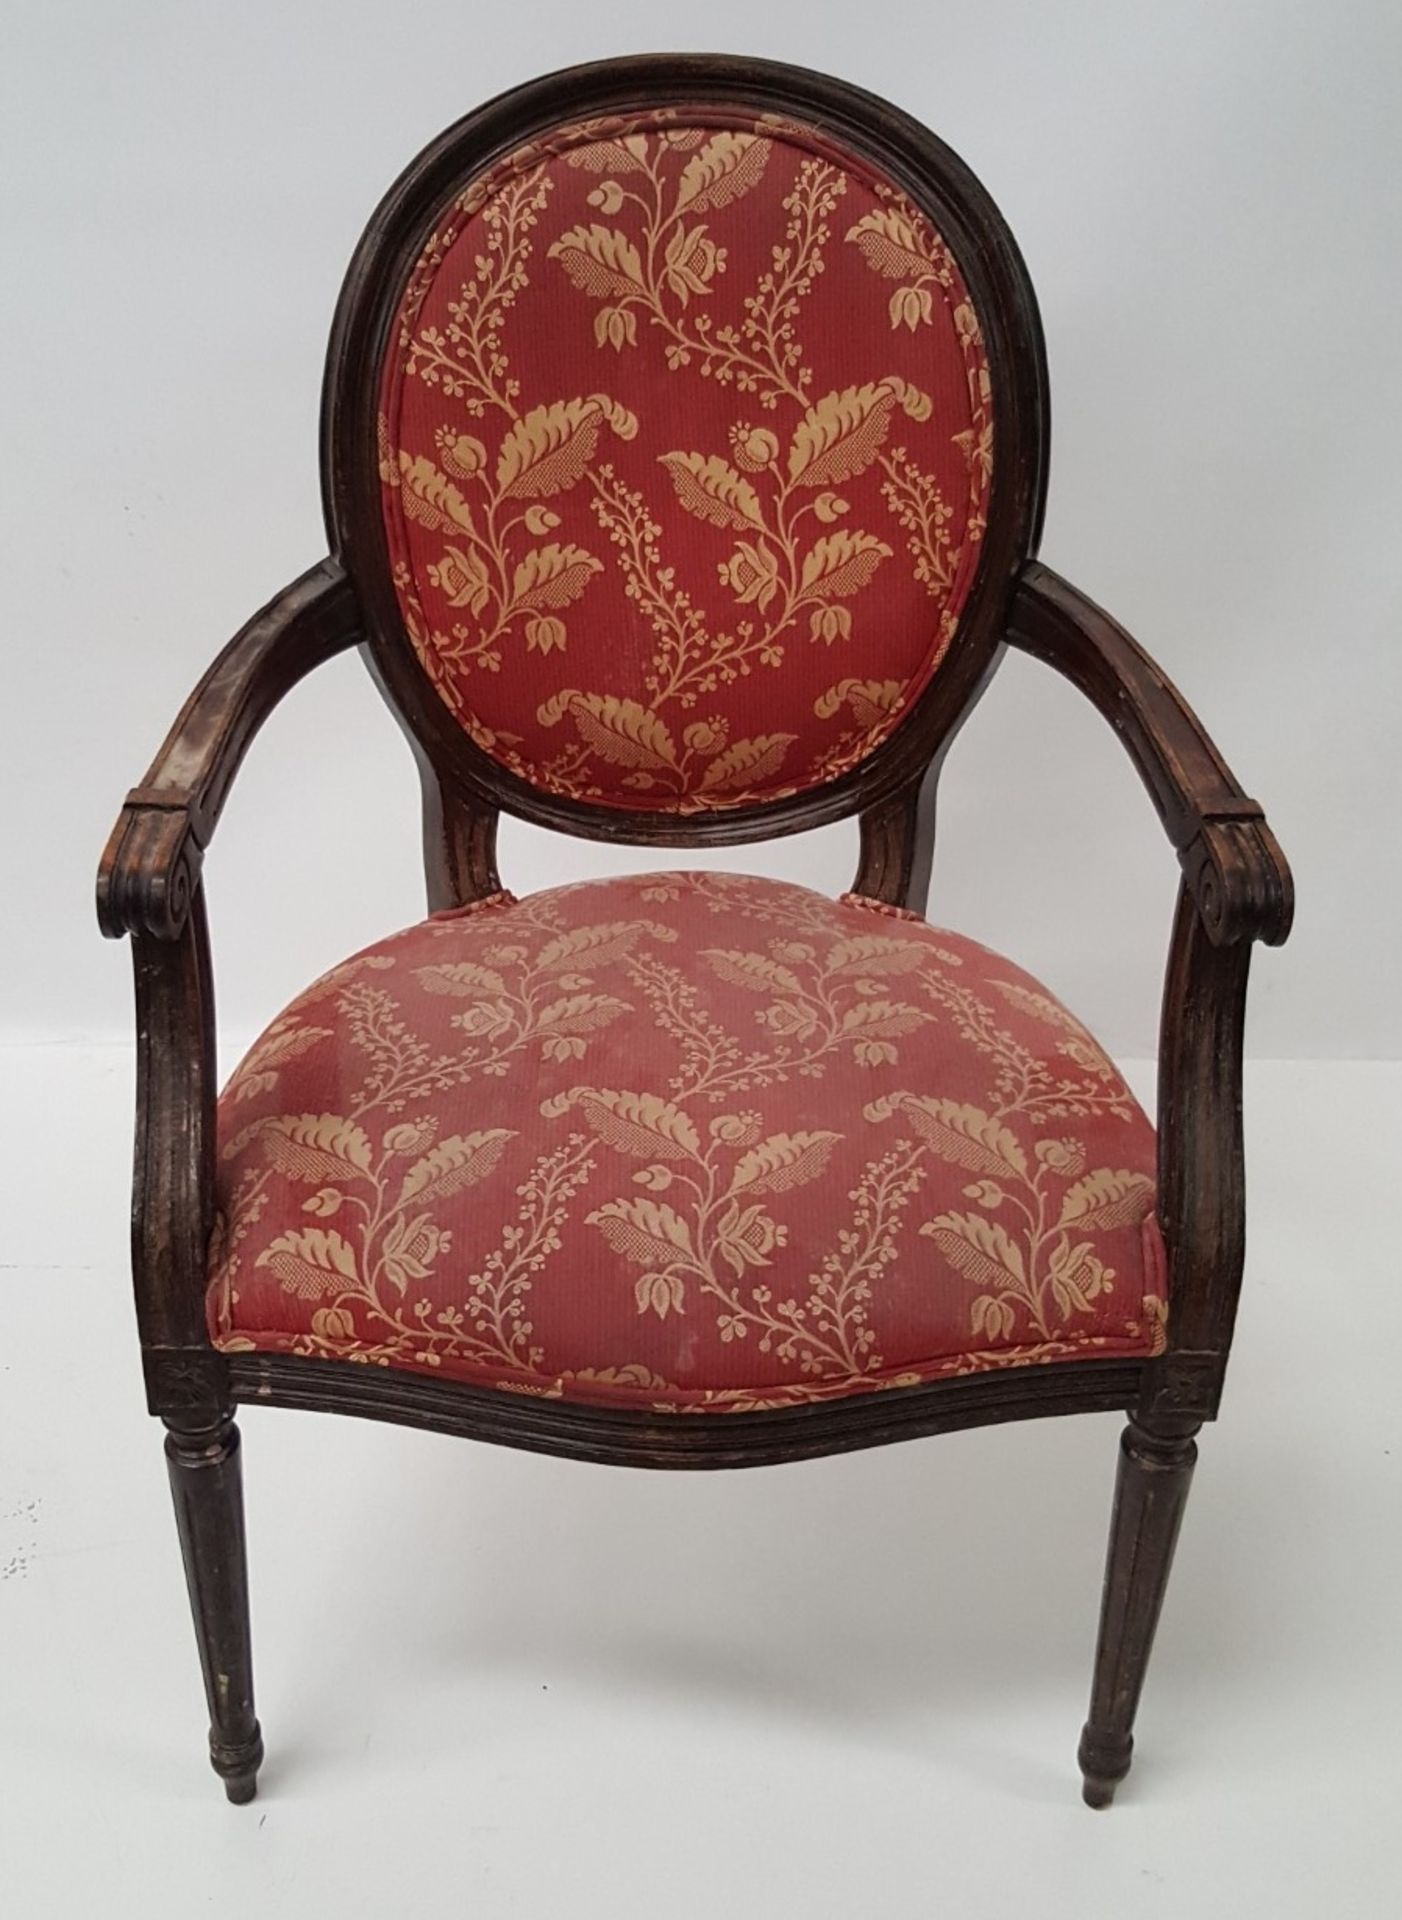 6 x Antique Style Wooden Chairs Upholstered In Red Fabric With Gold Leaf Design - CL431